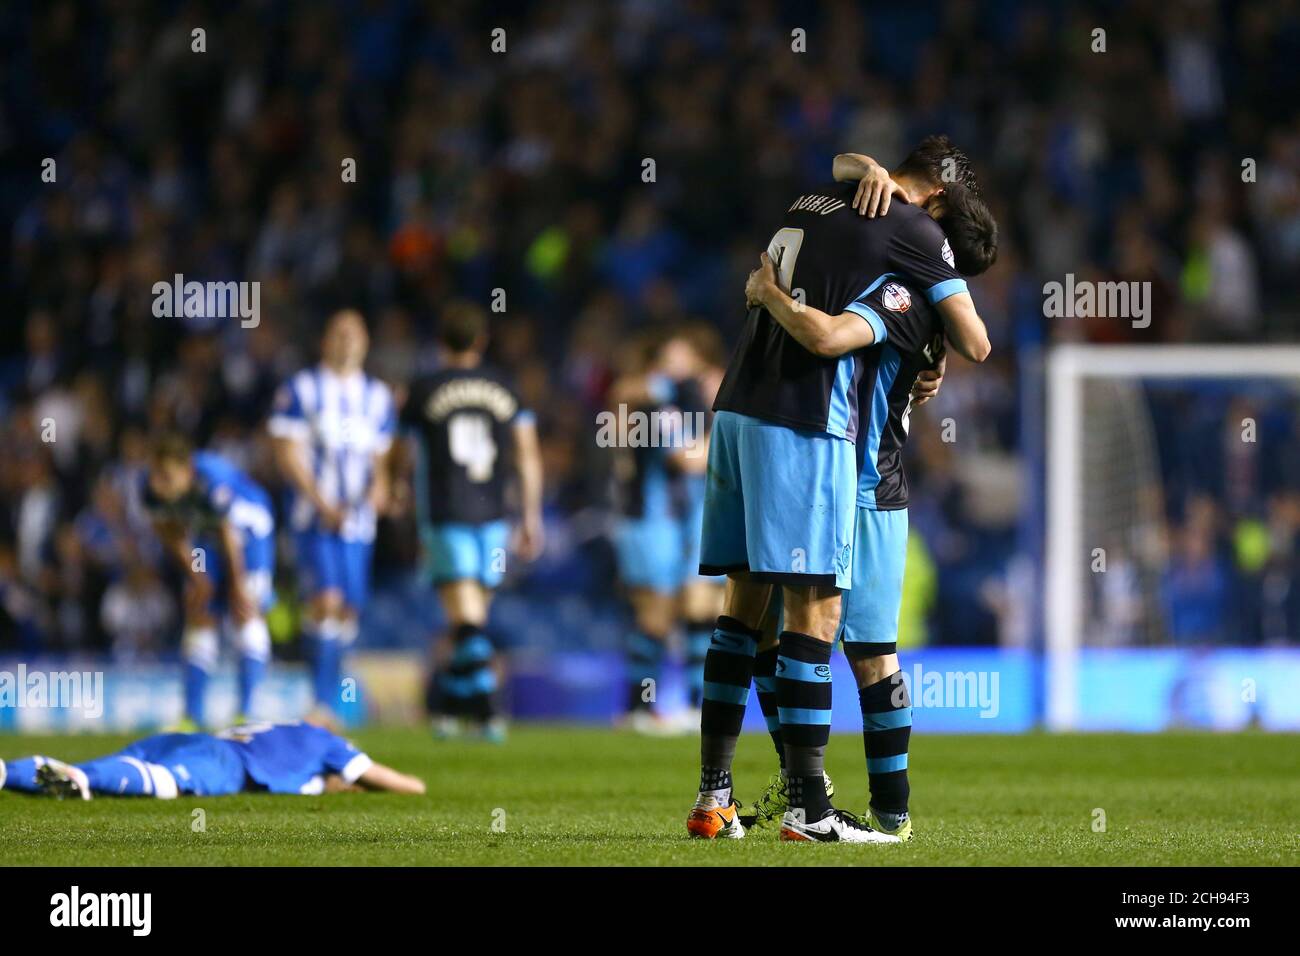 Sheffield Wednesdays Atdhe Nuhiu and Fernando Forestieri (right) celebrate after the final whistle during the Sky Bet Championship play off, second leg match at the AMEX Stadium, Brighton Stock Photo